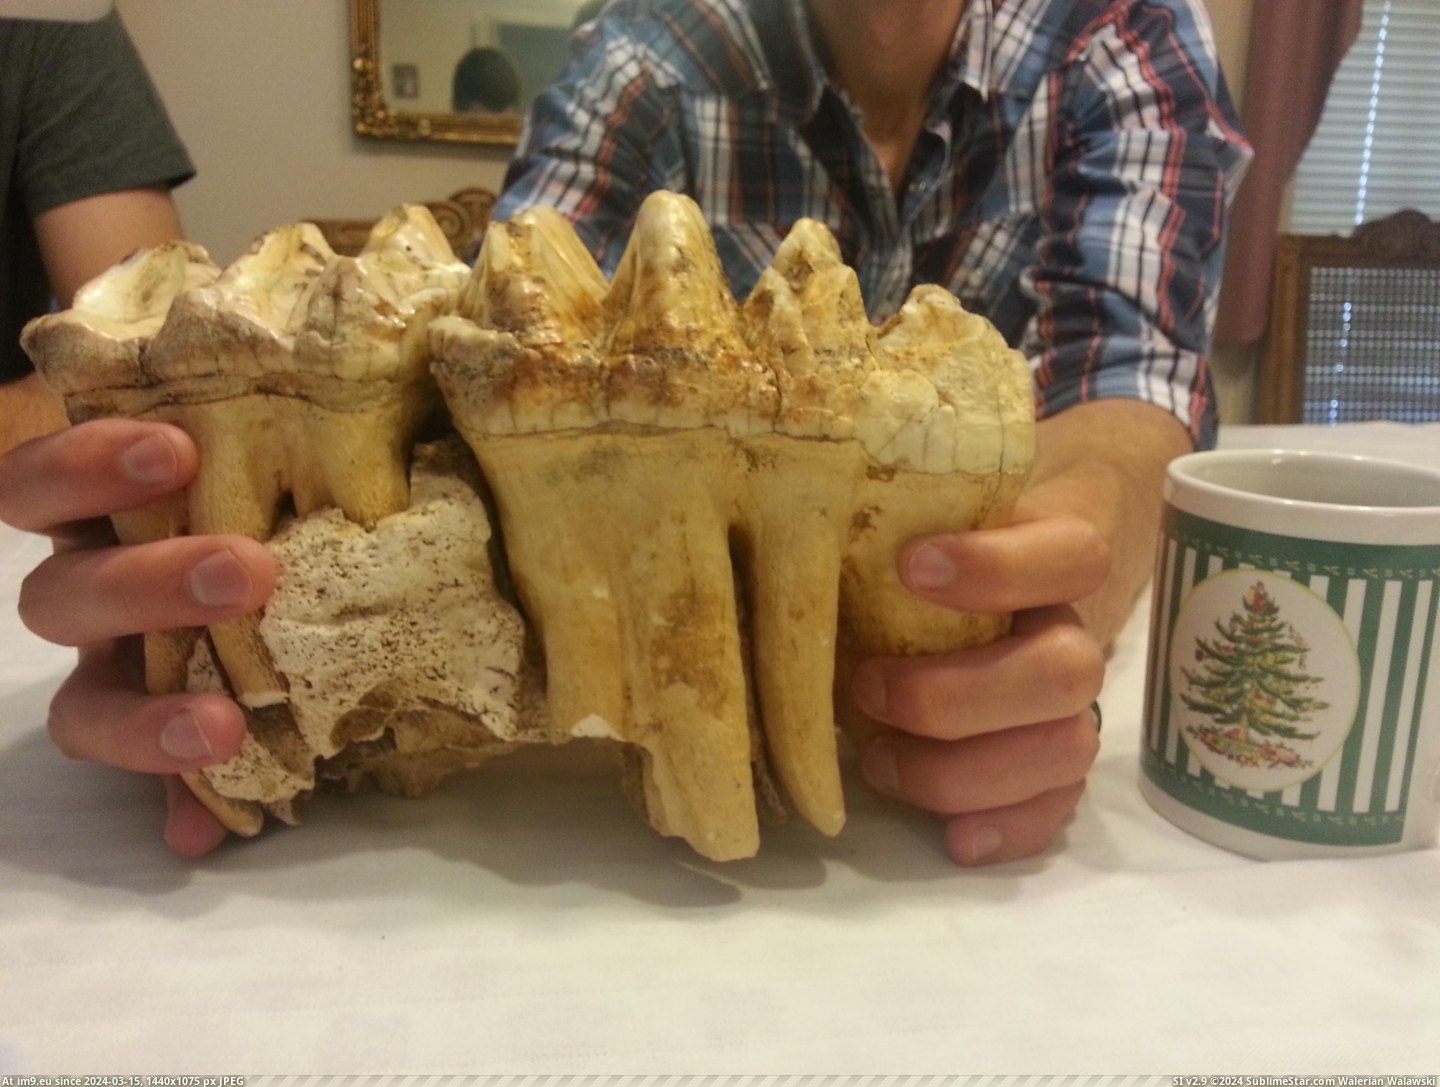 #Scale #Coffee #Cup #Cave #Teeth #Arkansas #Mastodon #Northern #Grandpa #Pair [Pics] In 1964 my grandpa found a pair of mastodon teeth in a cave in northern Arkansas- the coffee cup is for scale. Pic. (Obraz z album My r/PICS favs))